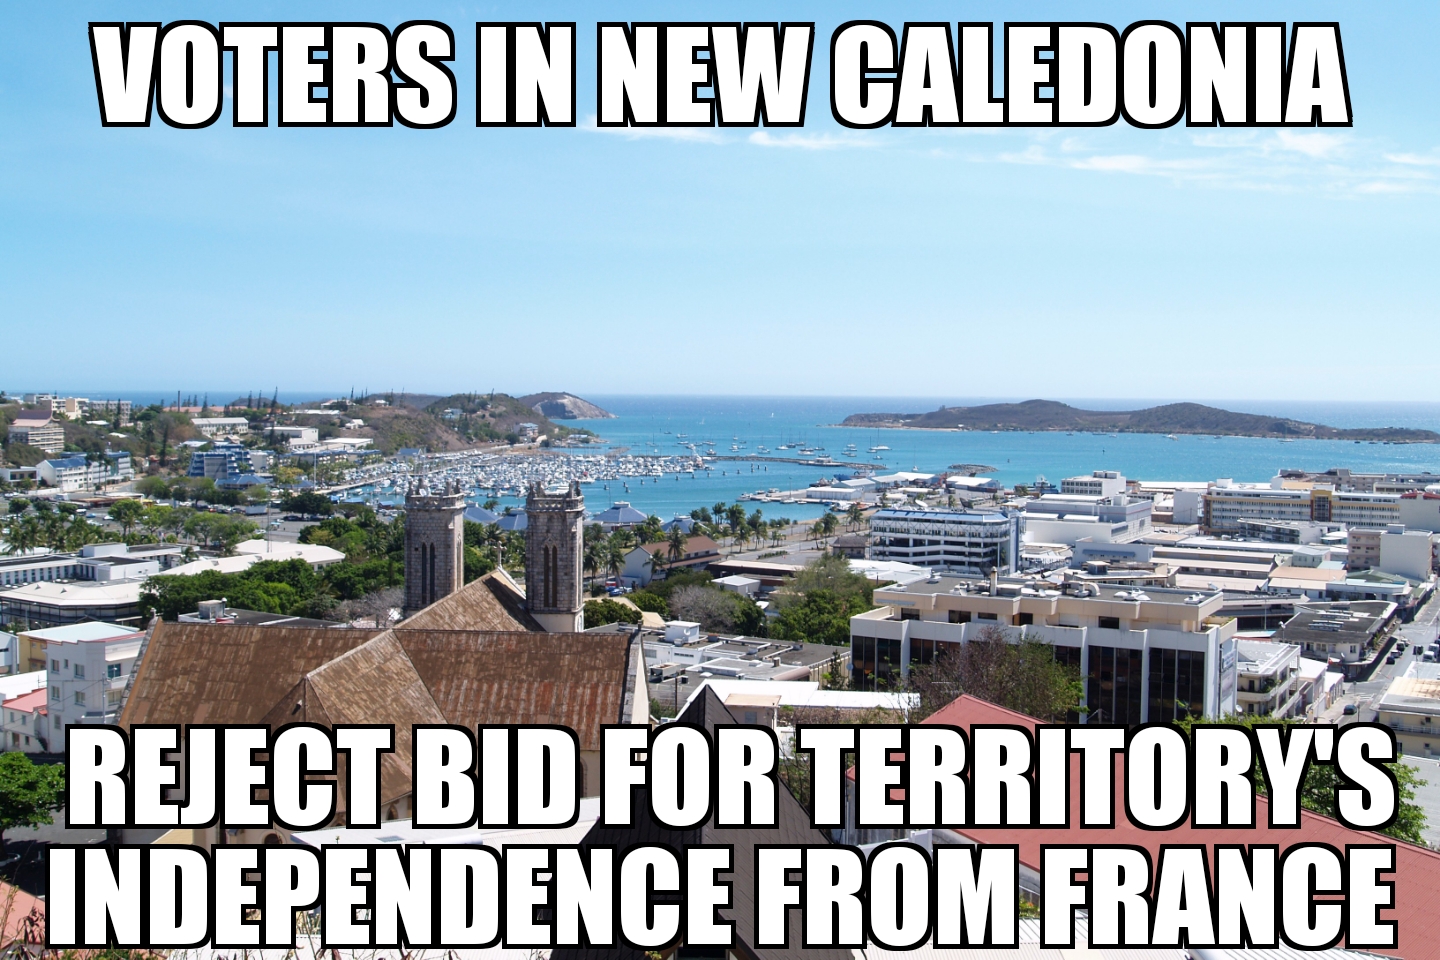 New Caledonia rejects independence